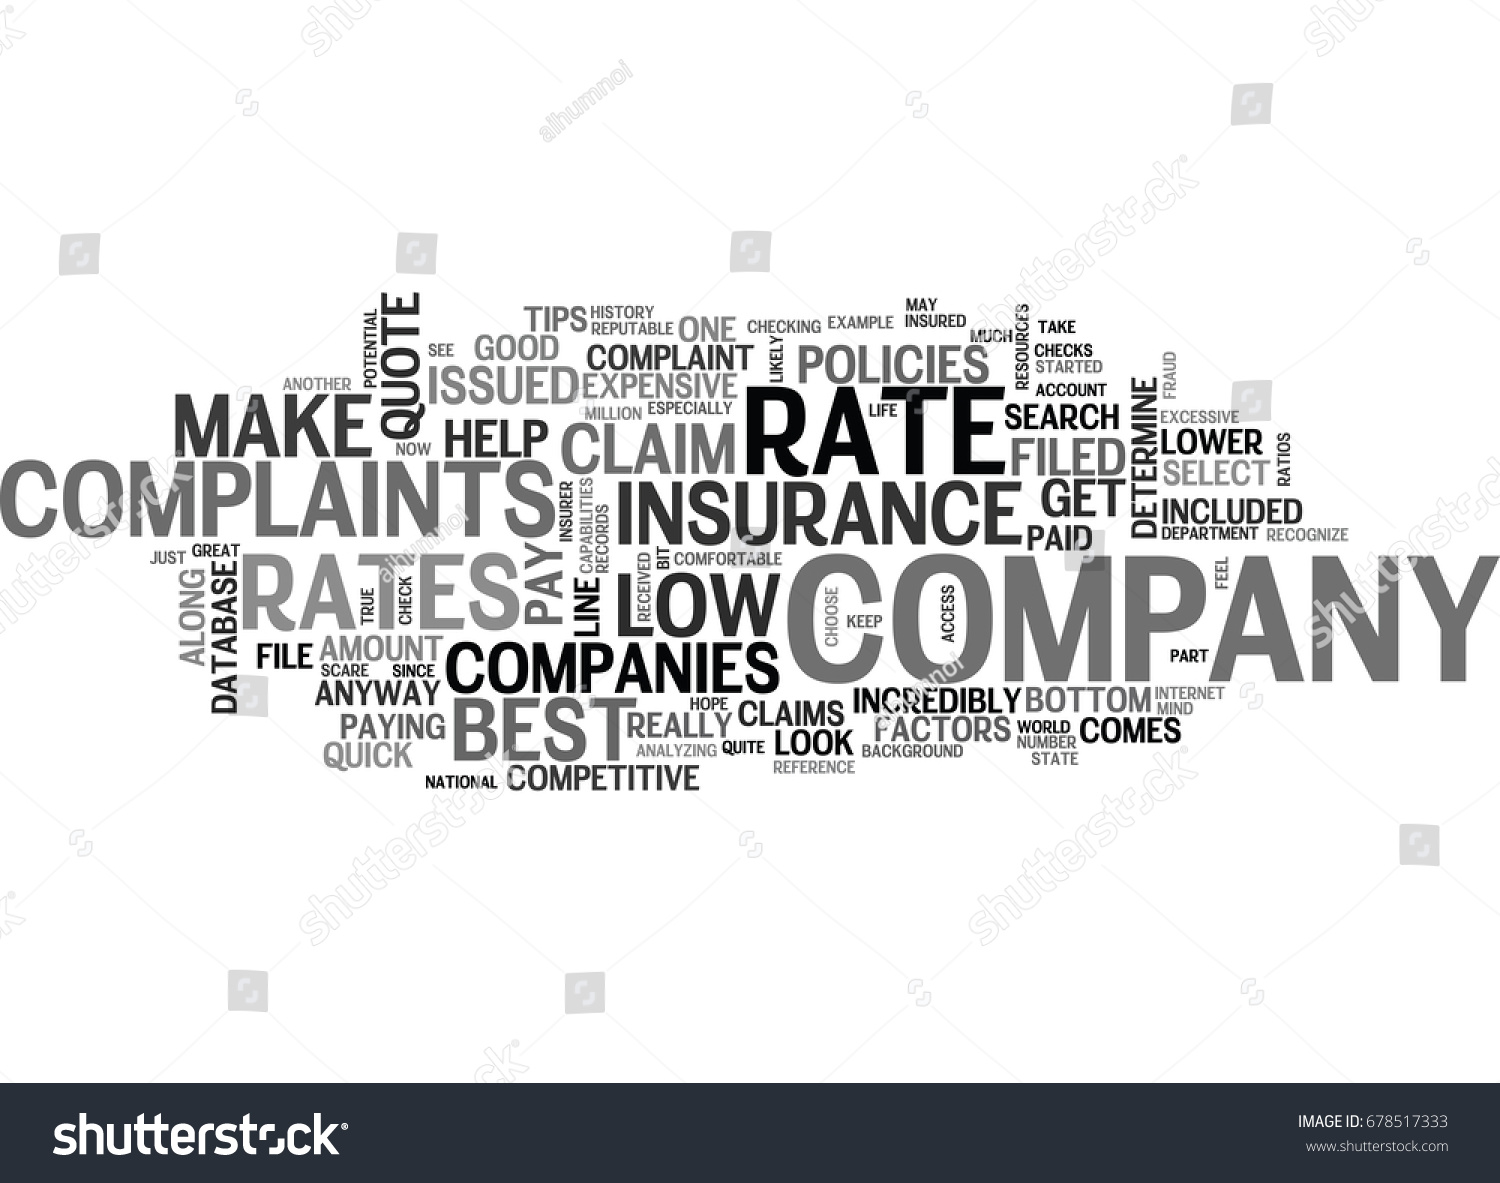 BEST LIFE INSURANCE QUOTE HOW TO RECOGNIZE IT TEXT WORD CLOUD CONCEPT